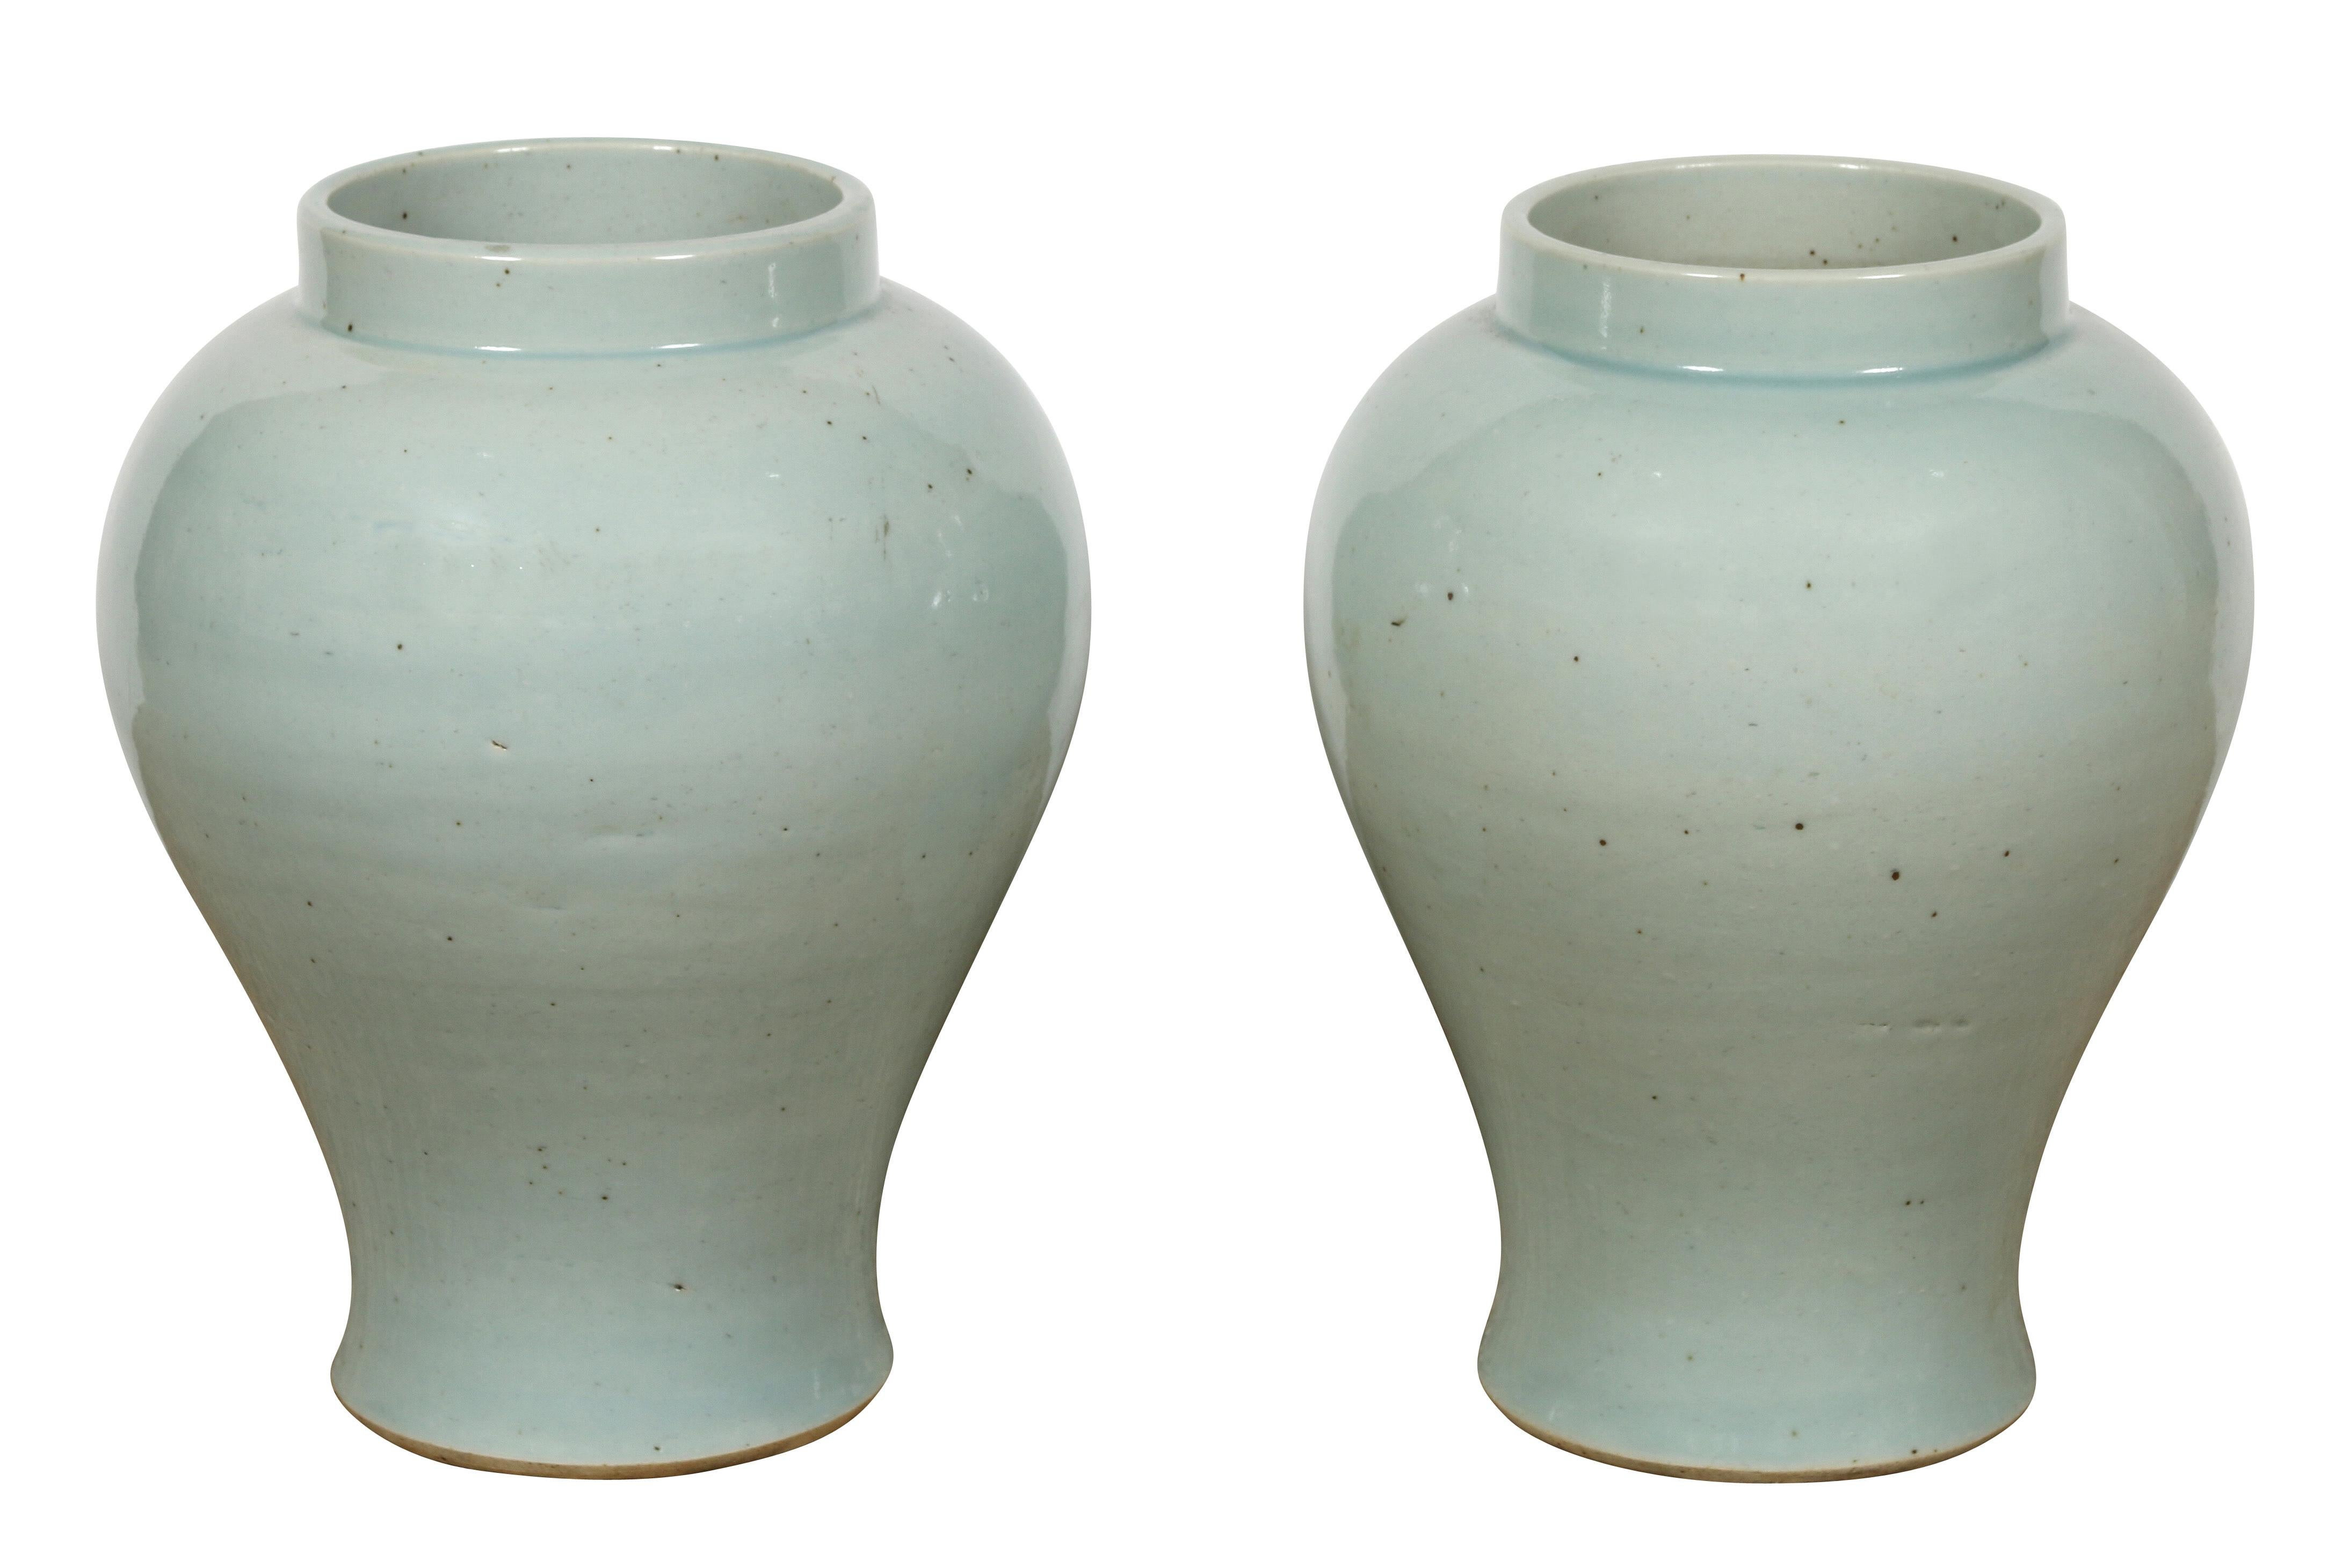 A Chinese ceramic vases in a beautiful, soft celadon. These are great as vessels for flowers, but also quite pretty on their own. Priced separately at $195 each.